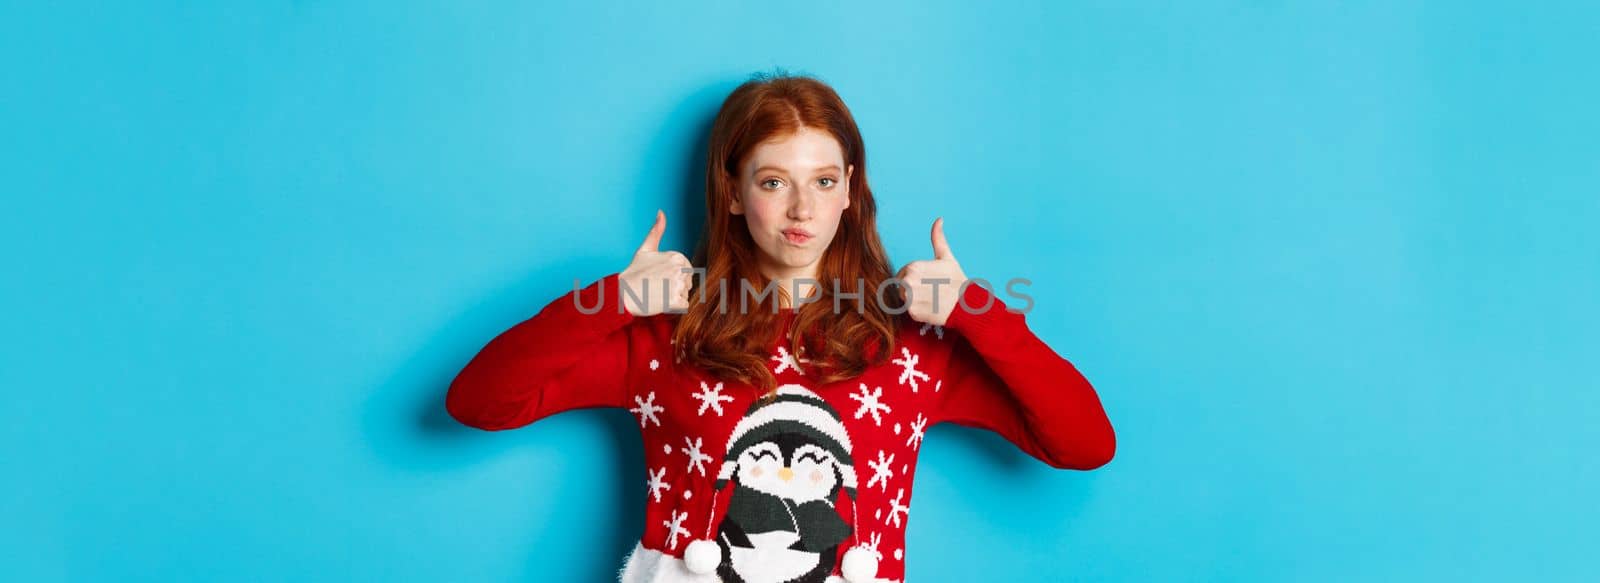 Winter holidays and Christmas Eve concept. Impressed redhead girl in xmas sweater, nod in approval and showing thumb up, praise good product, standing over blue background.